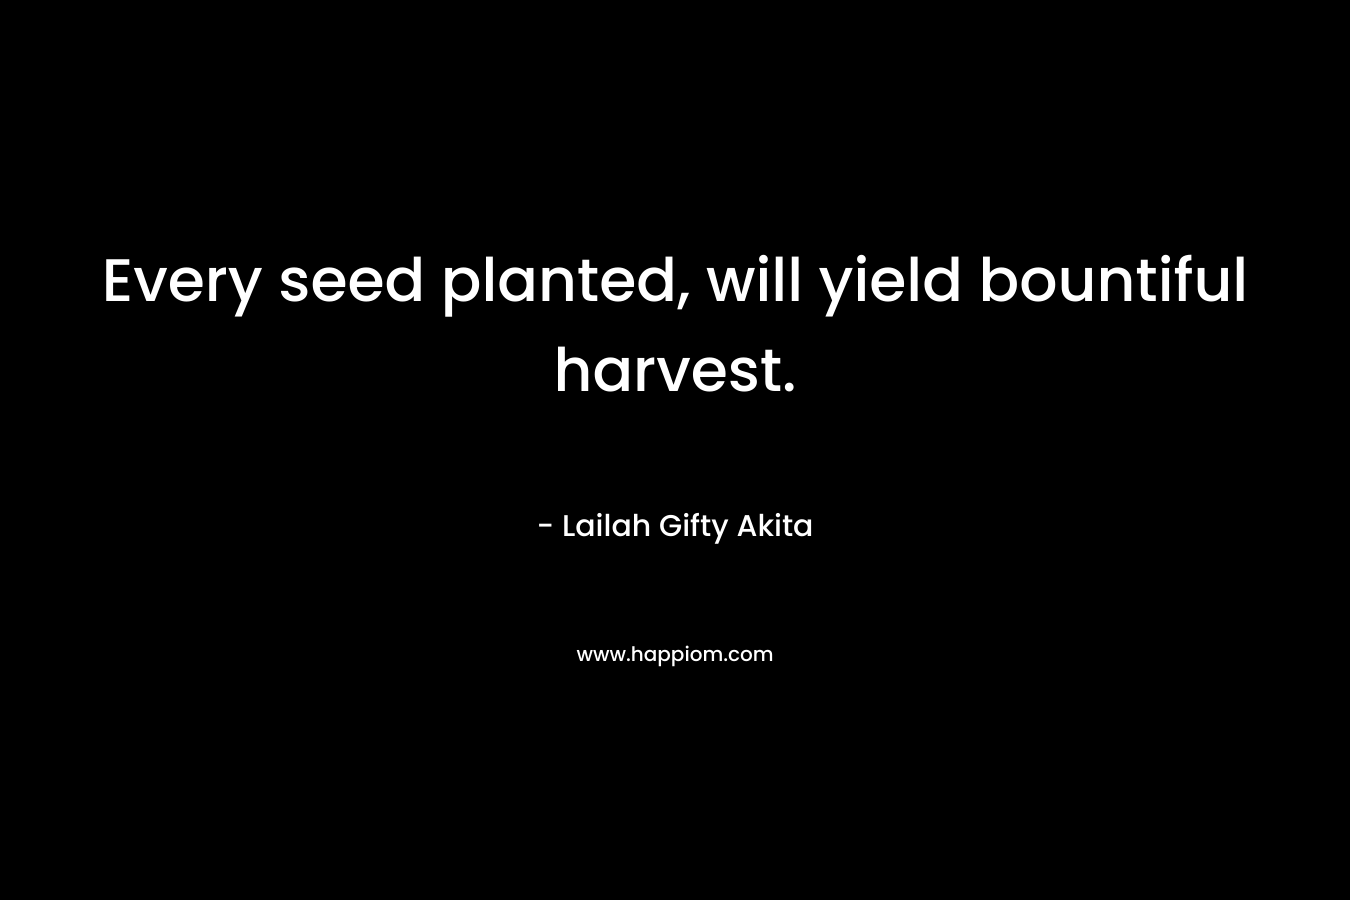 Every seed planted, will yield bountiful harvest.